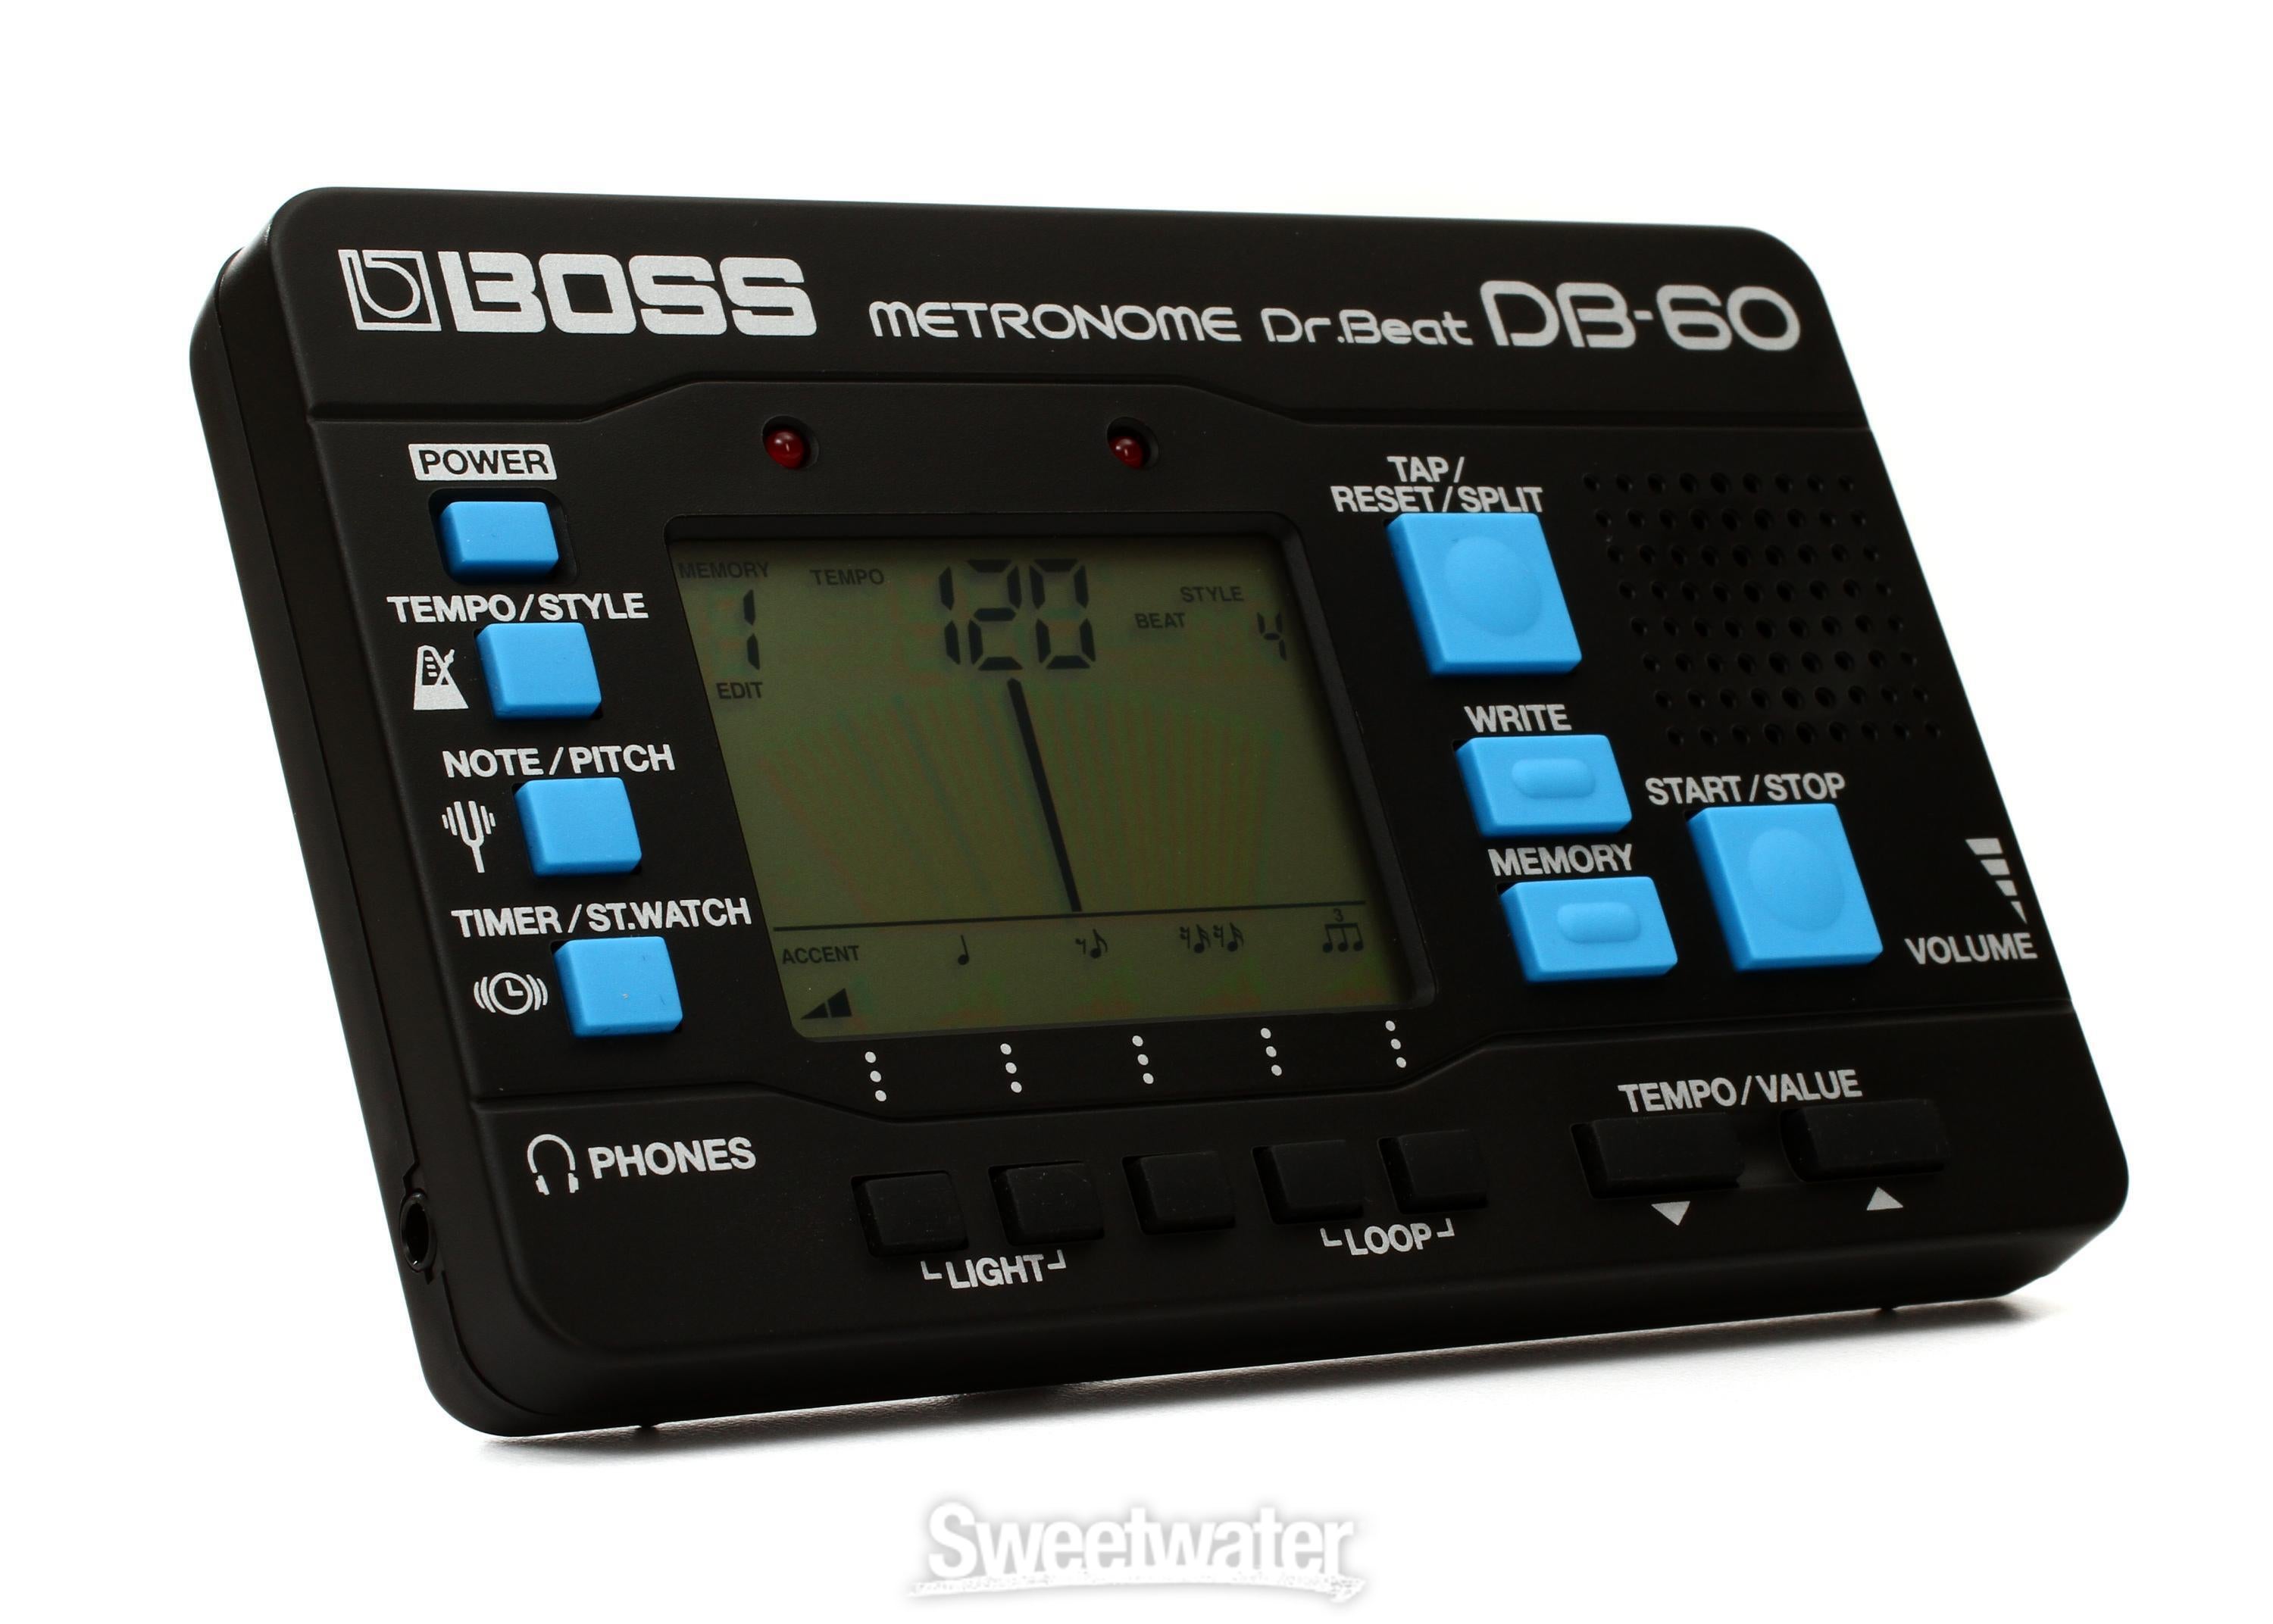 Boss DB-60 Dr. Beat Metronome with Rhythmic Patterns | Sweetwater